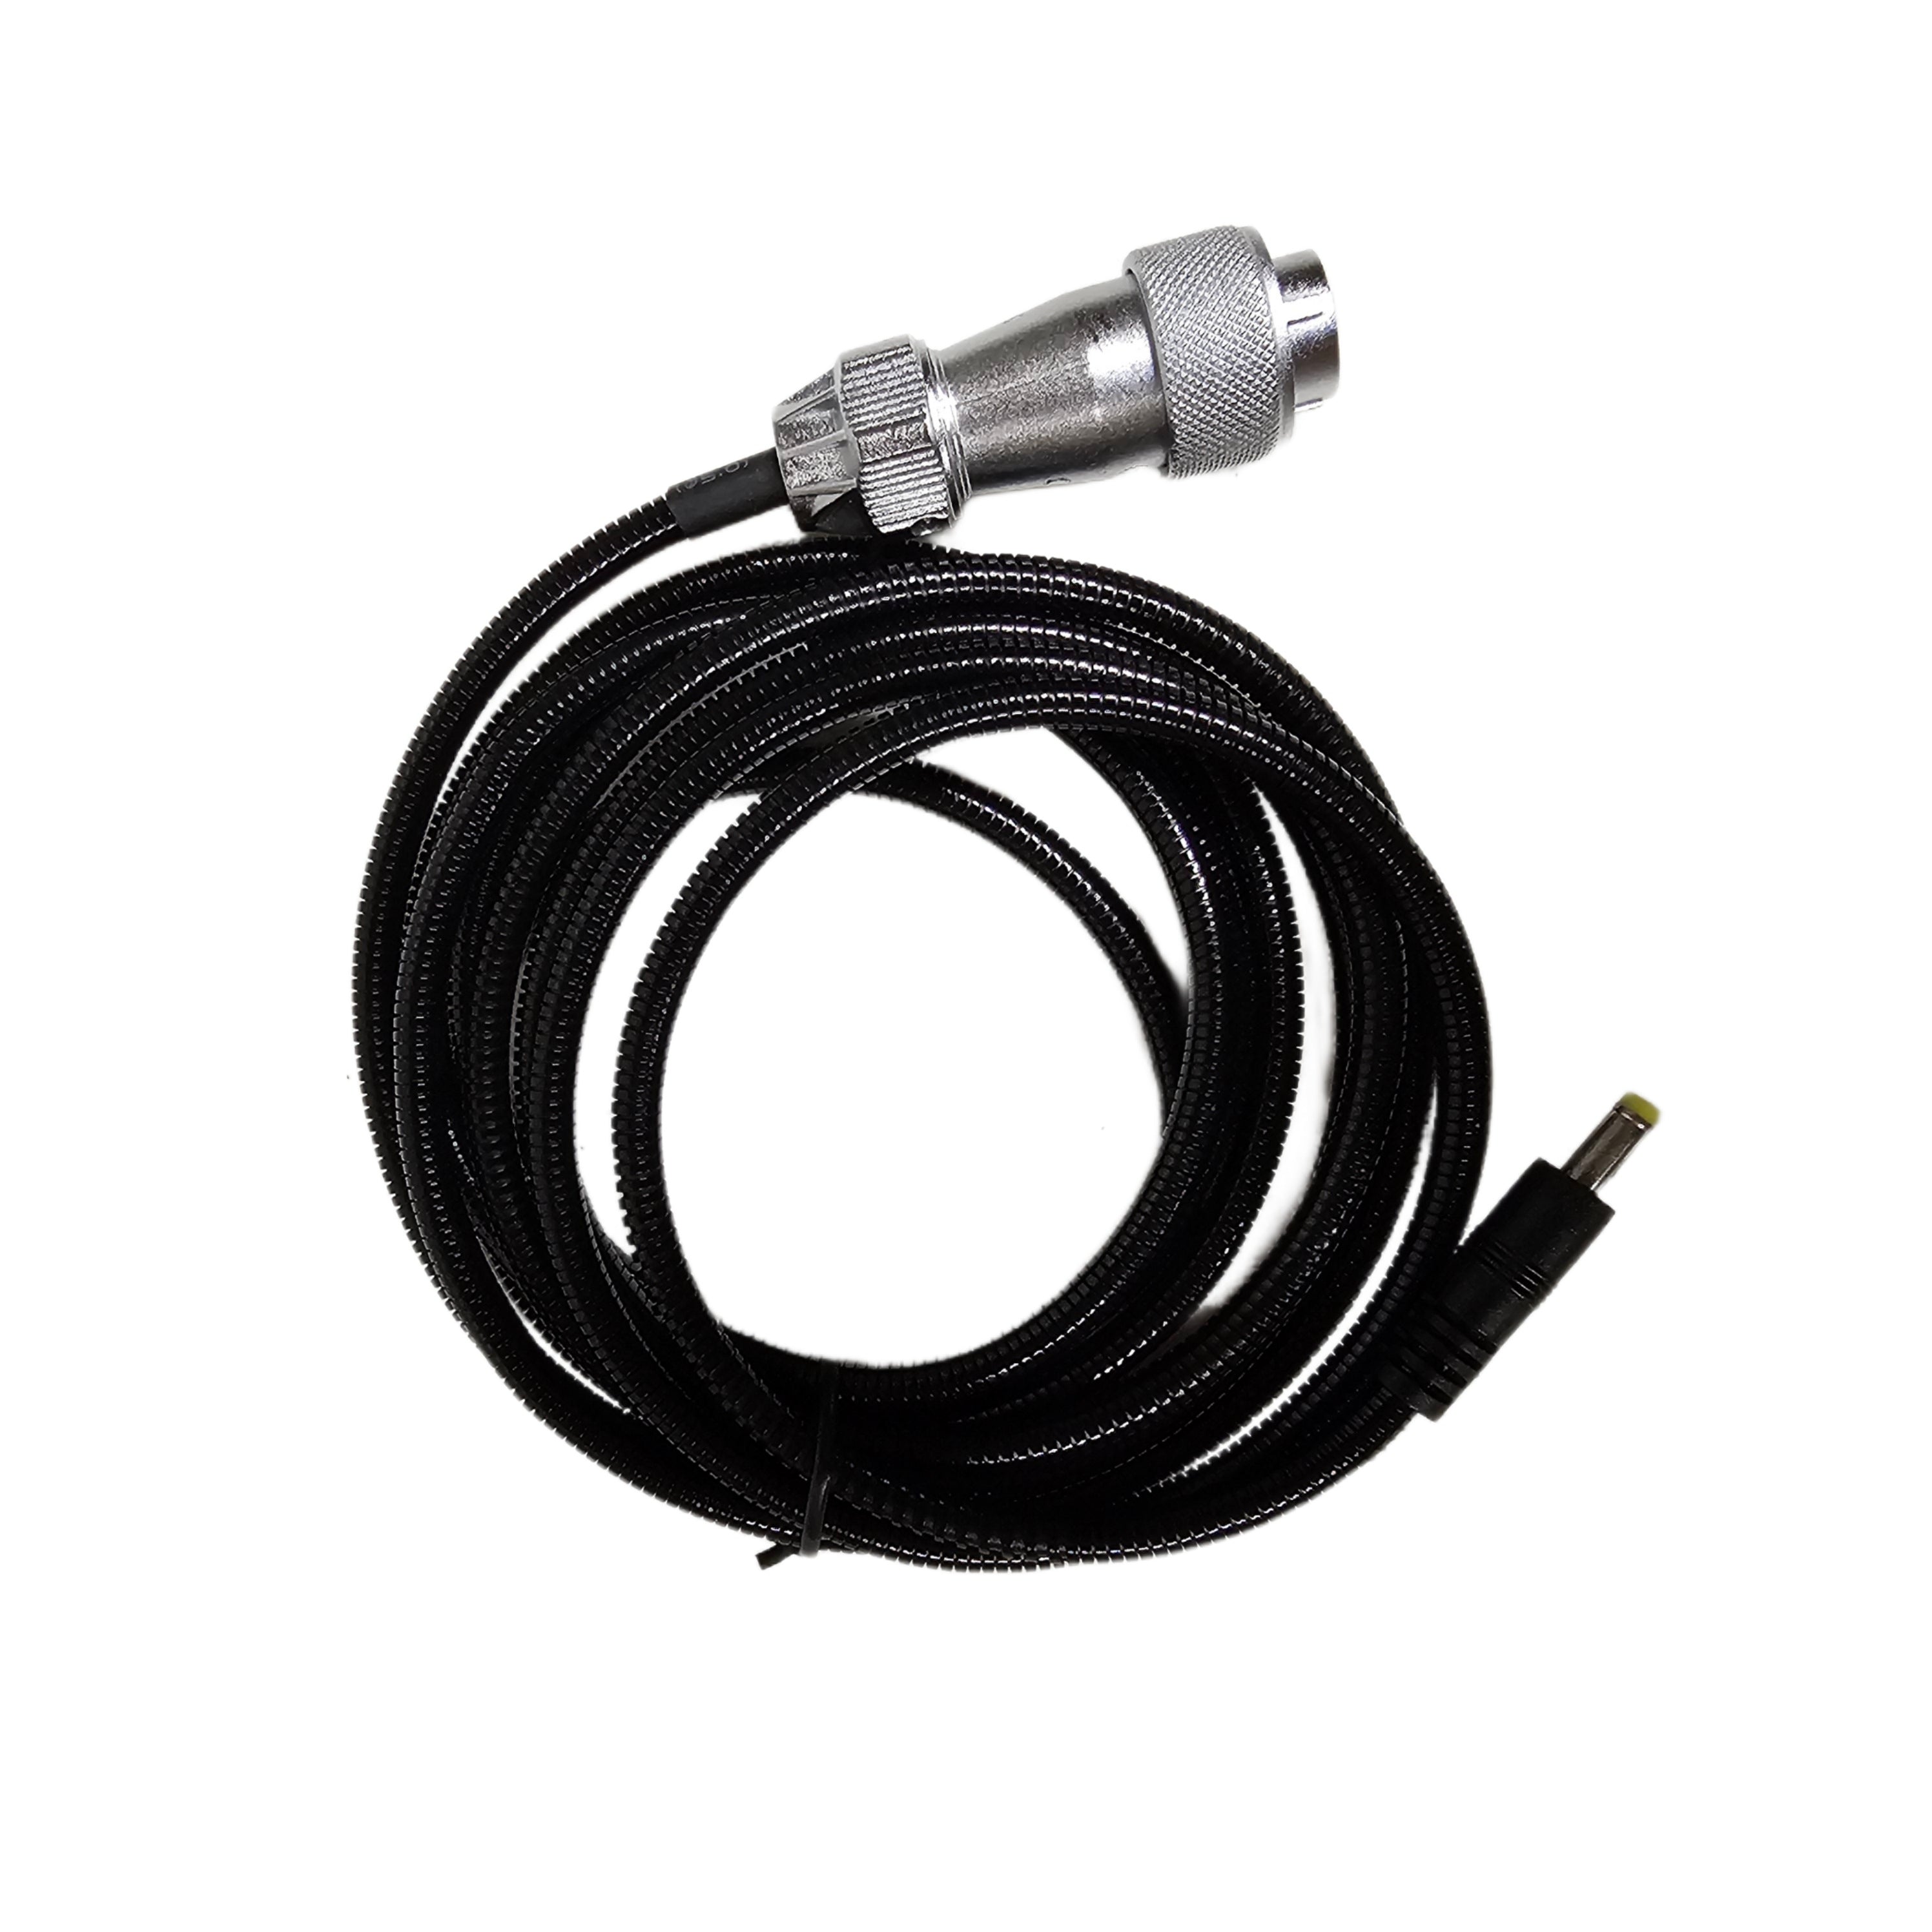 Power Pack 1800 Camera Power Cable